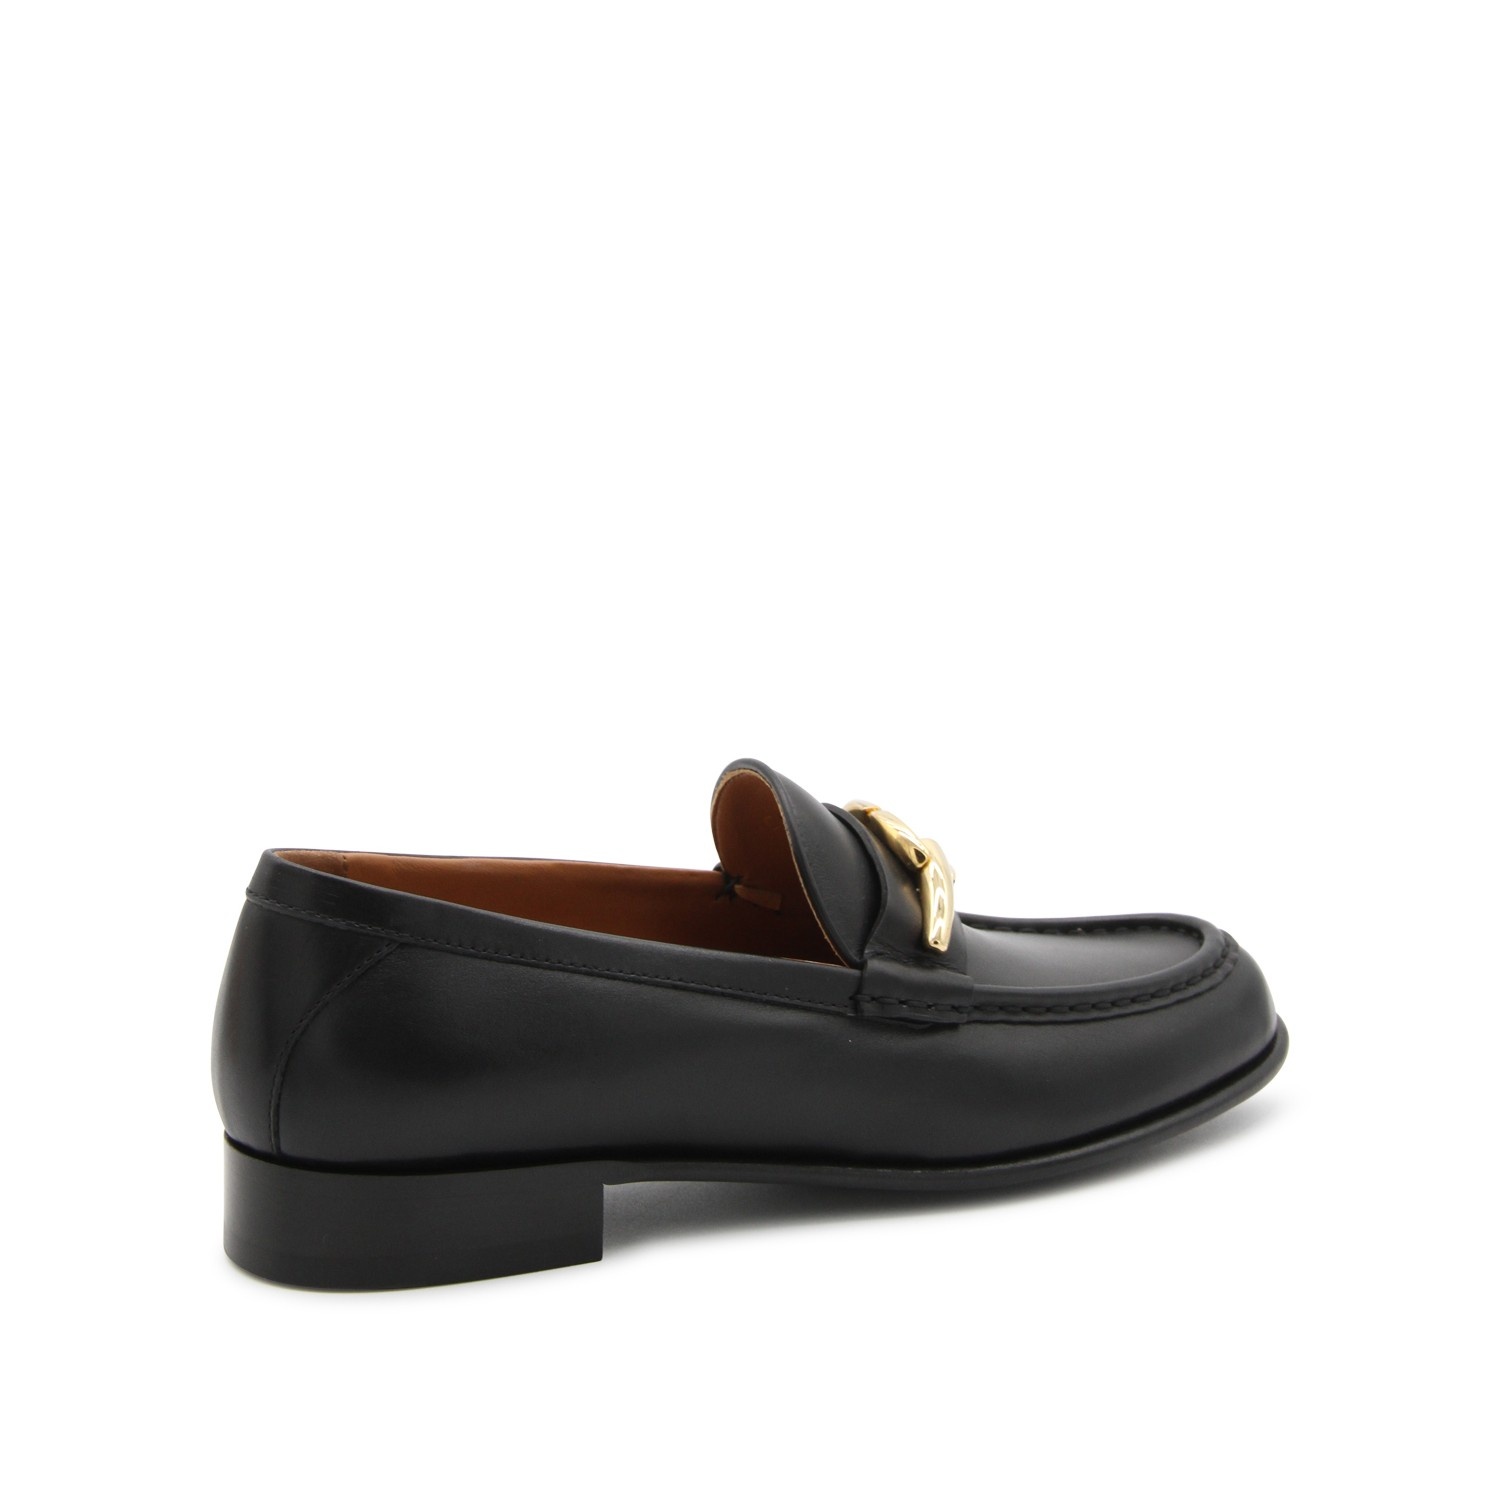 BLACK LEATHER LOAFERS - 3